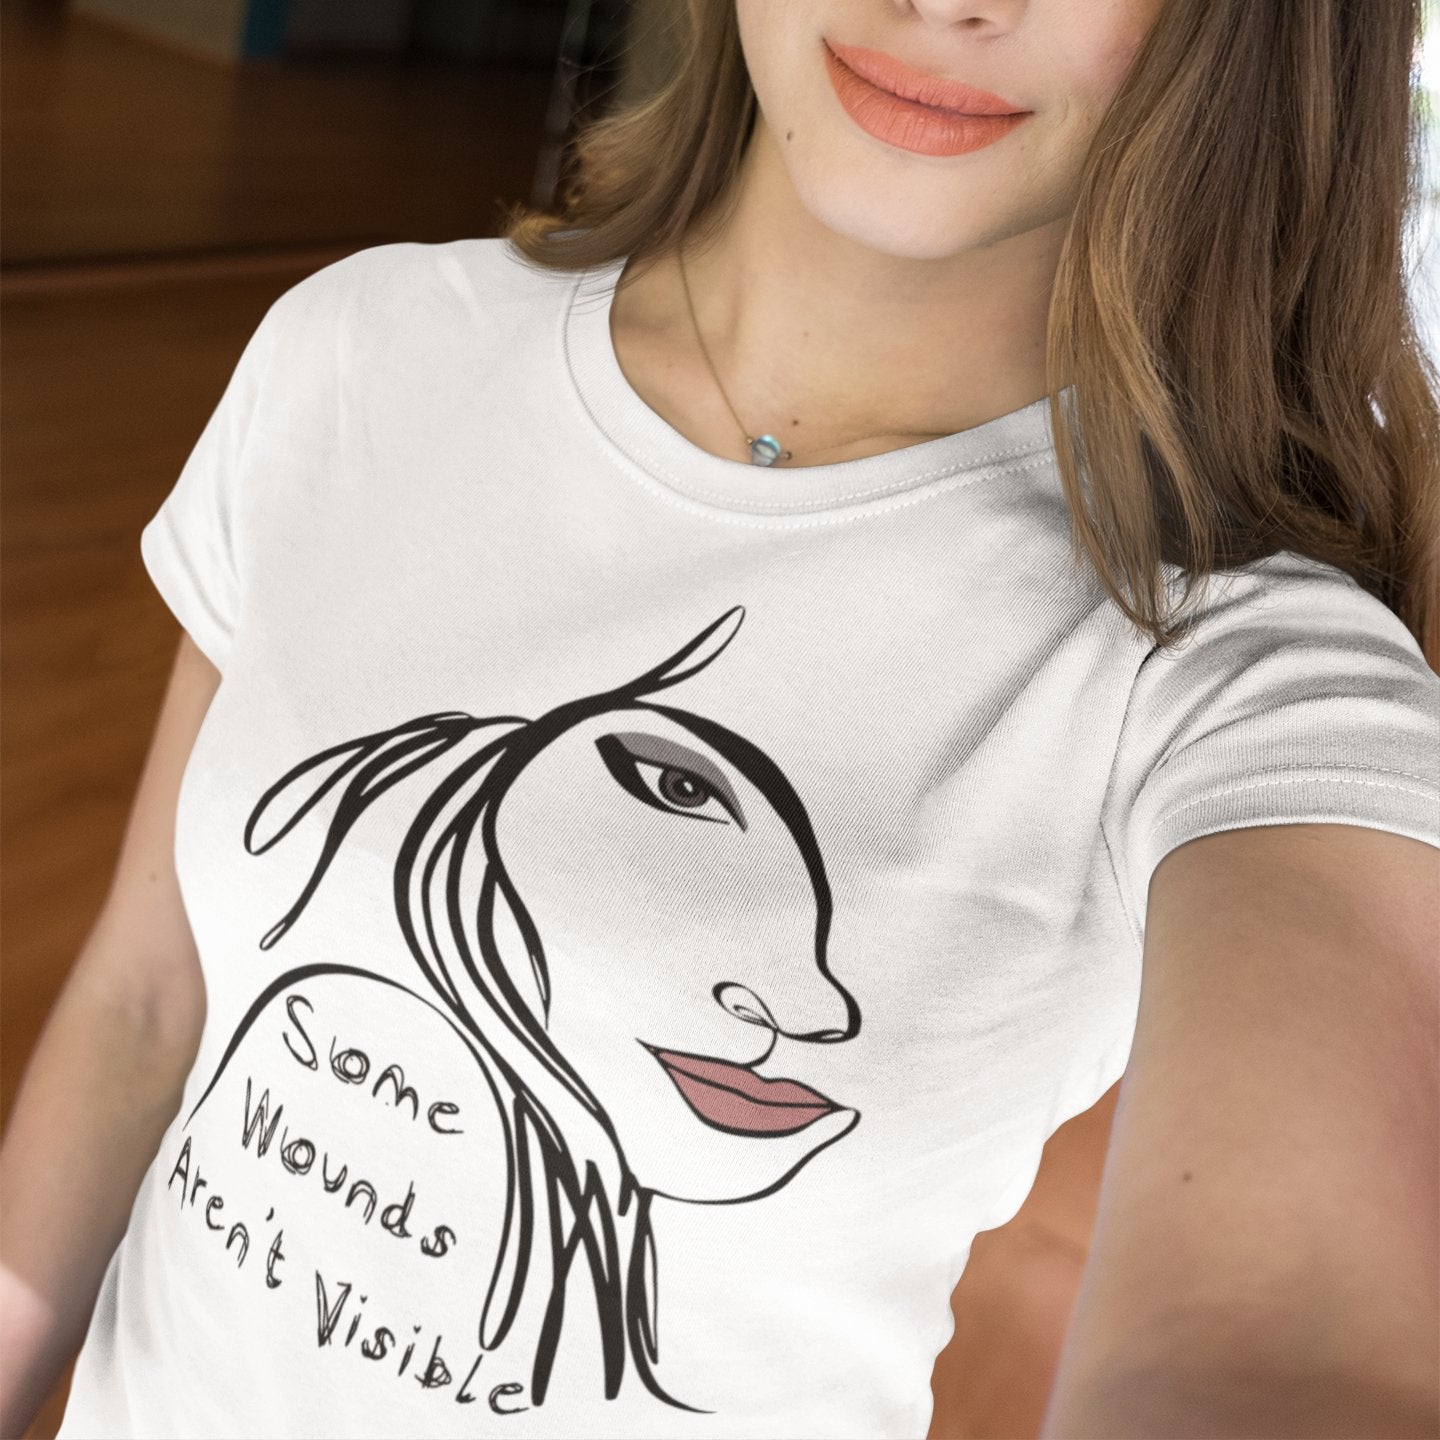 Woman wearing a some wounds aren't visible t-shirt with a profile picture of a woman